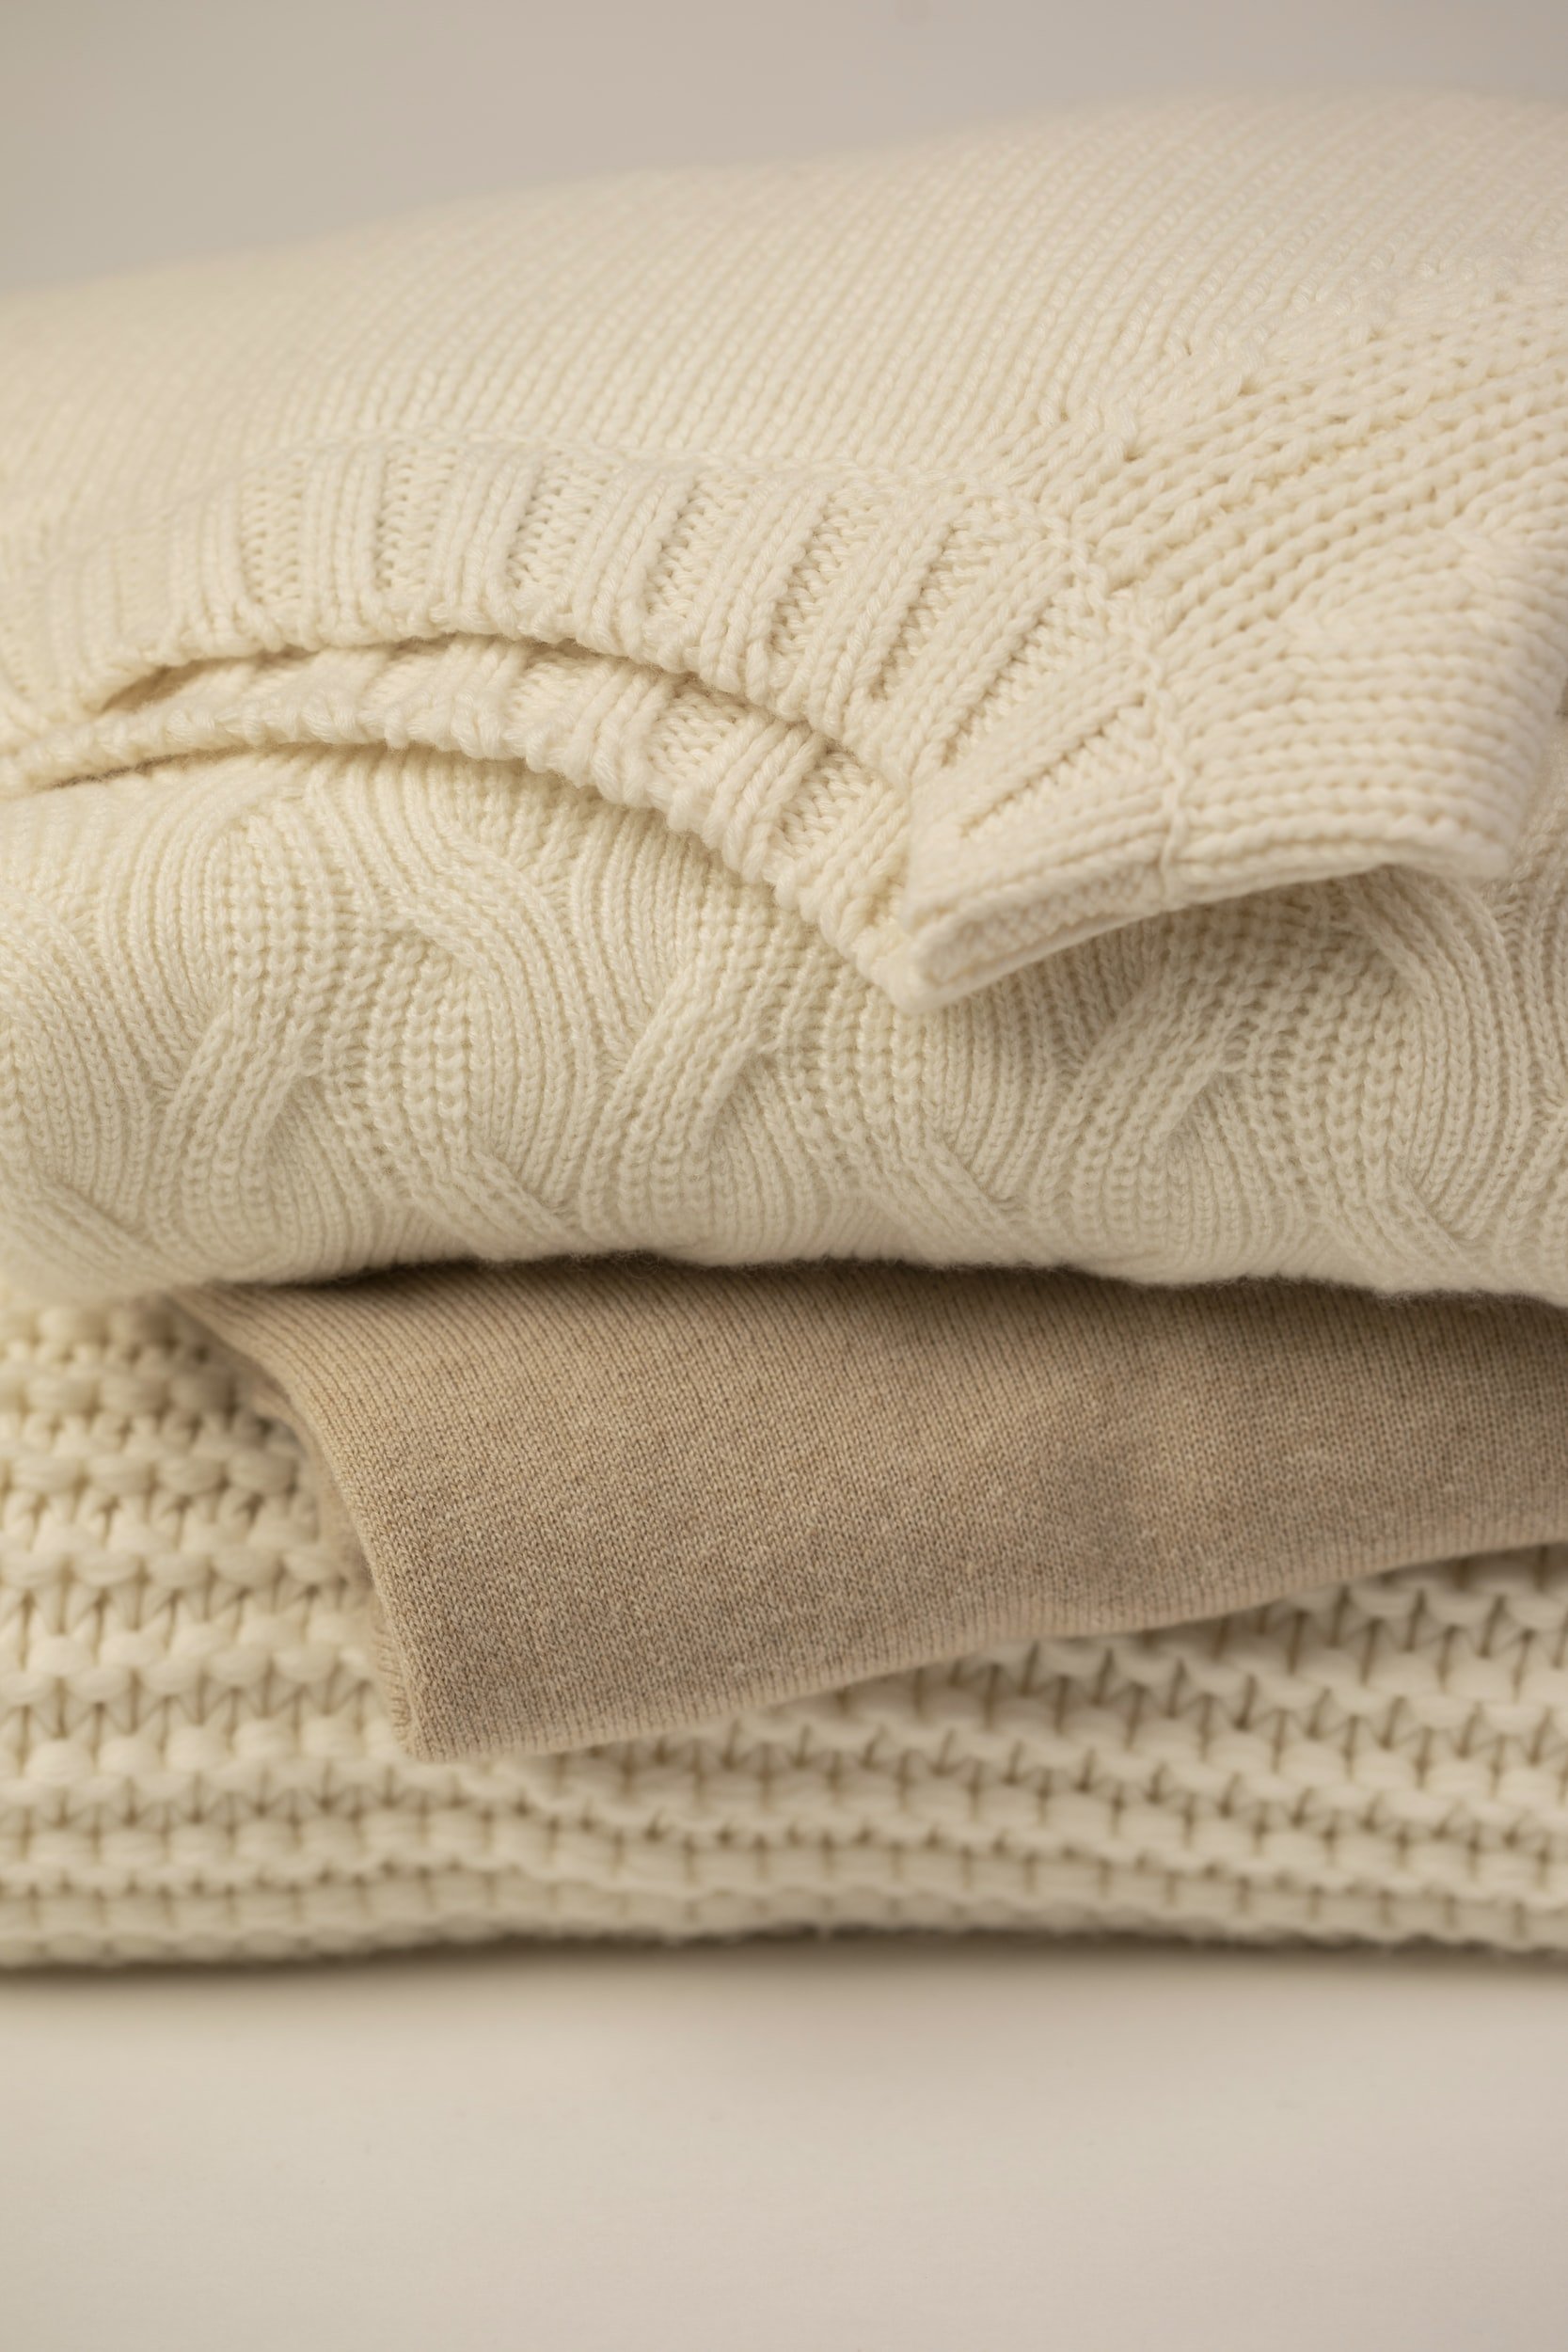 How To Care For Cashmere: Top 5 Tips | Chichi Ogwe